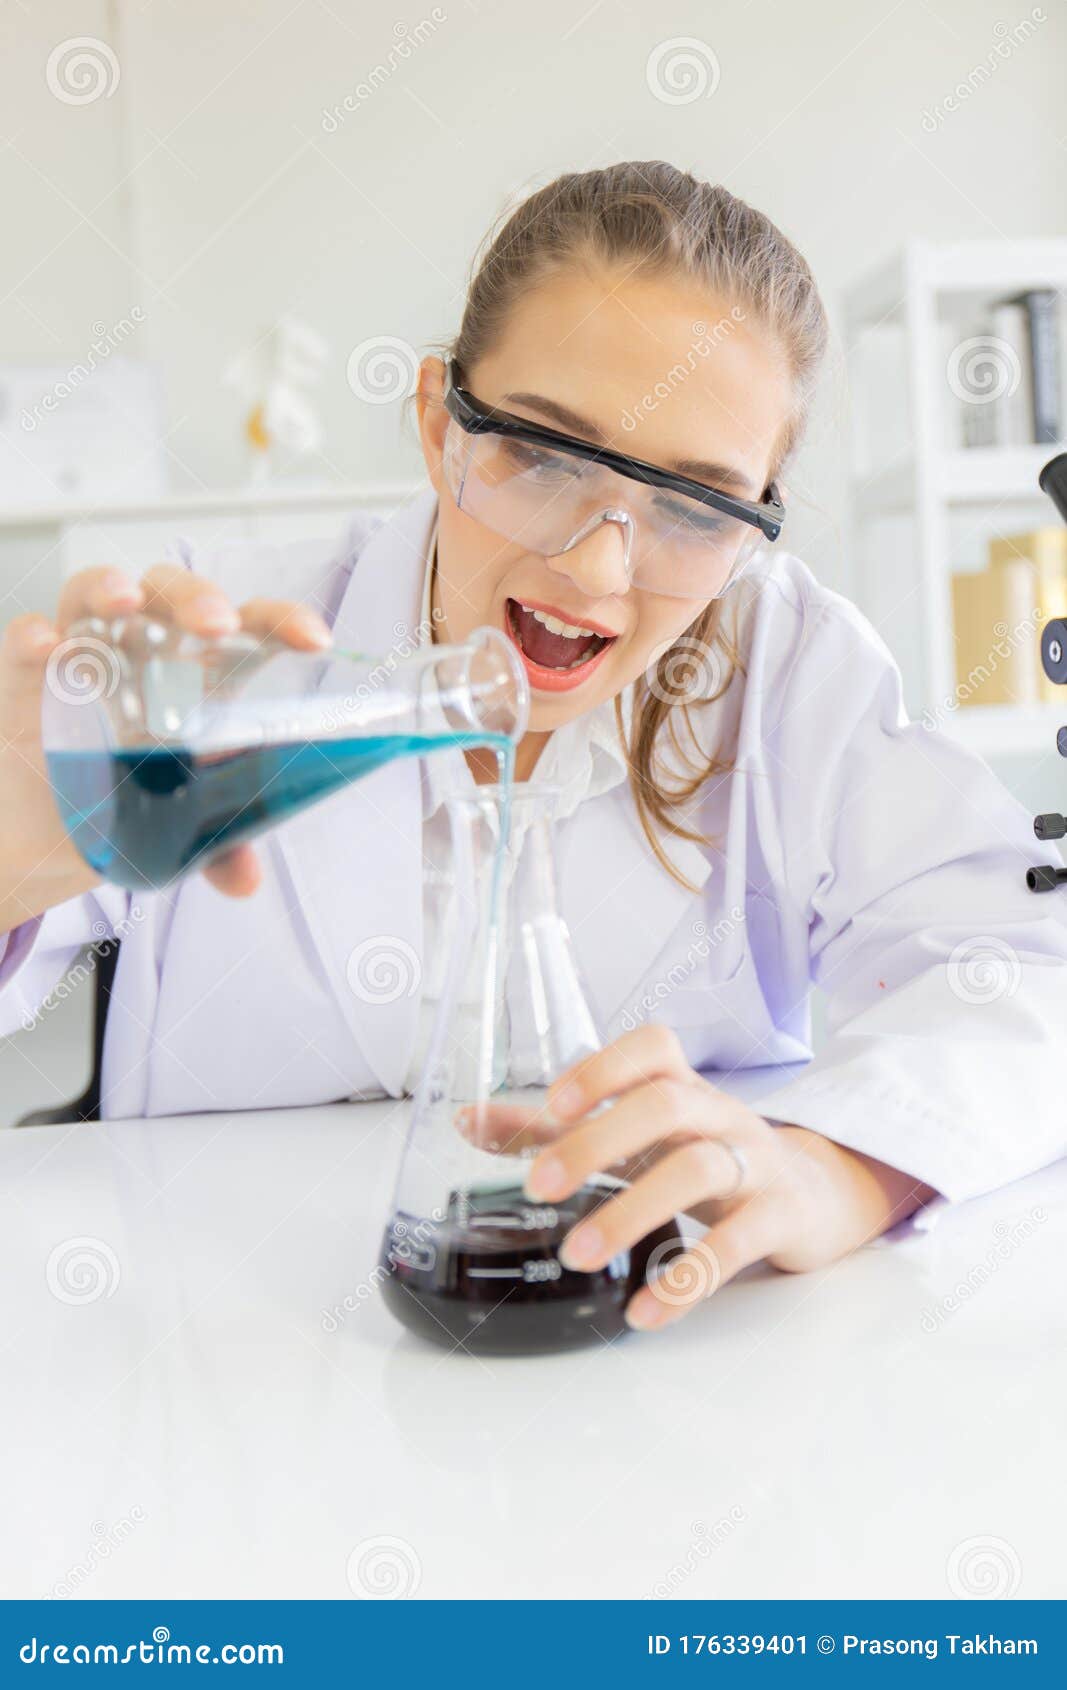 Beautiful Female Scientist is Operating in a Science Lab with Various ...